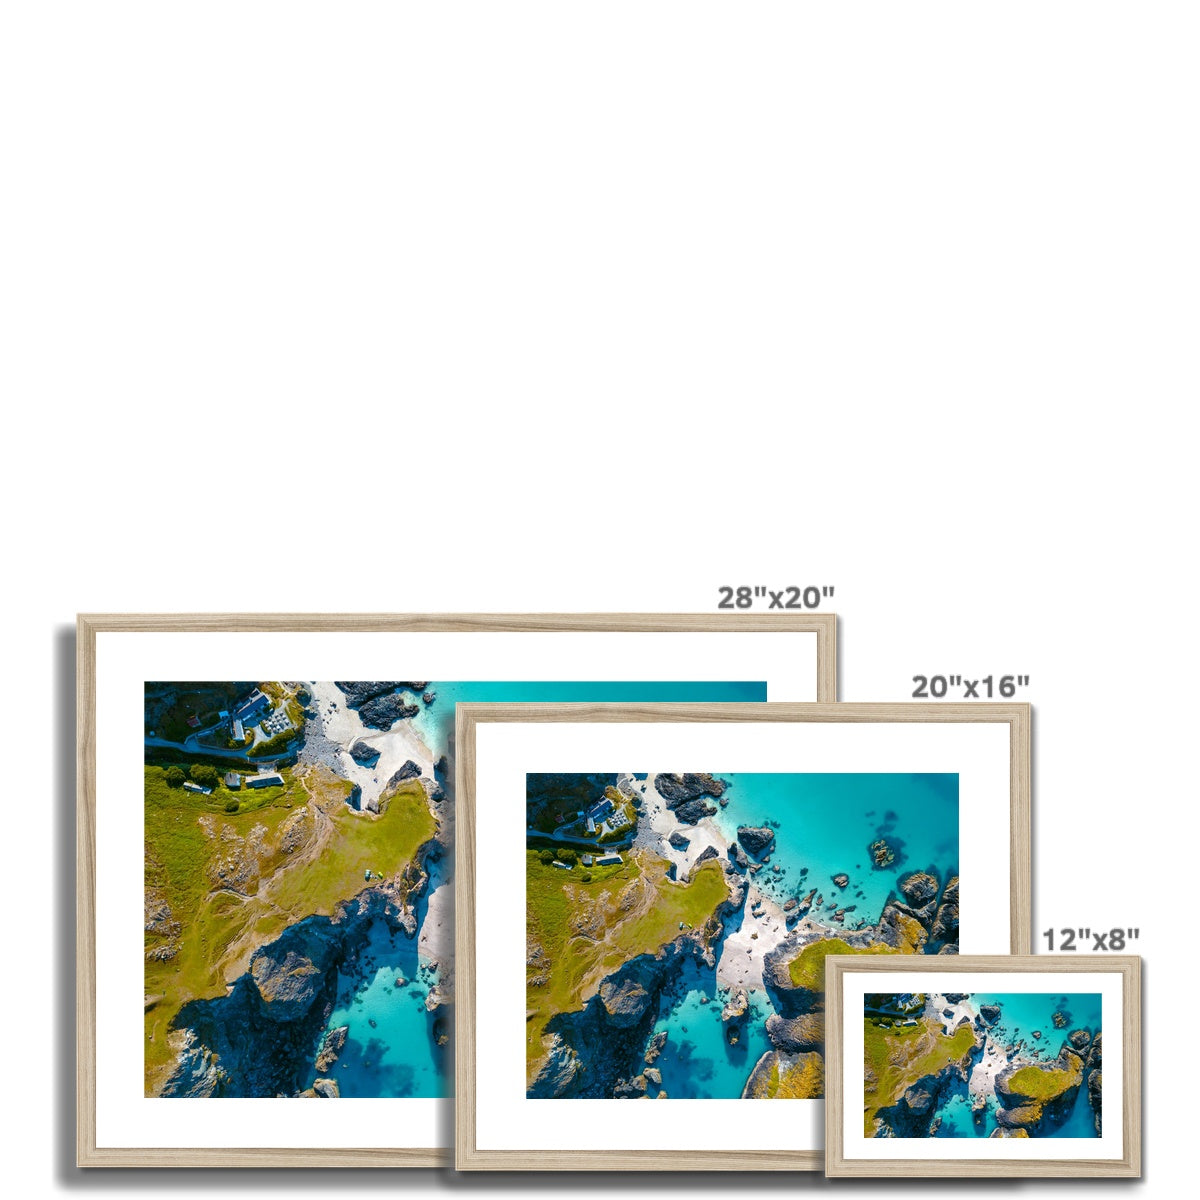 kynance cove wooden frame sizes